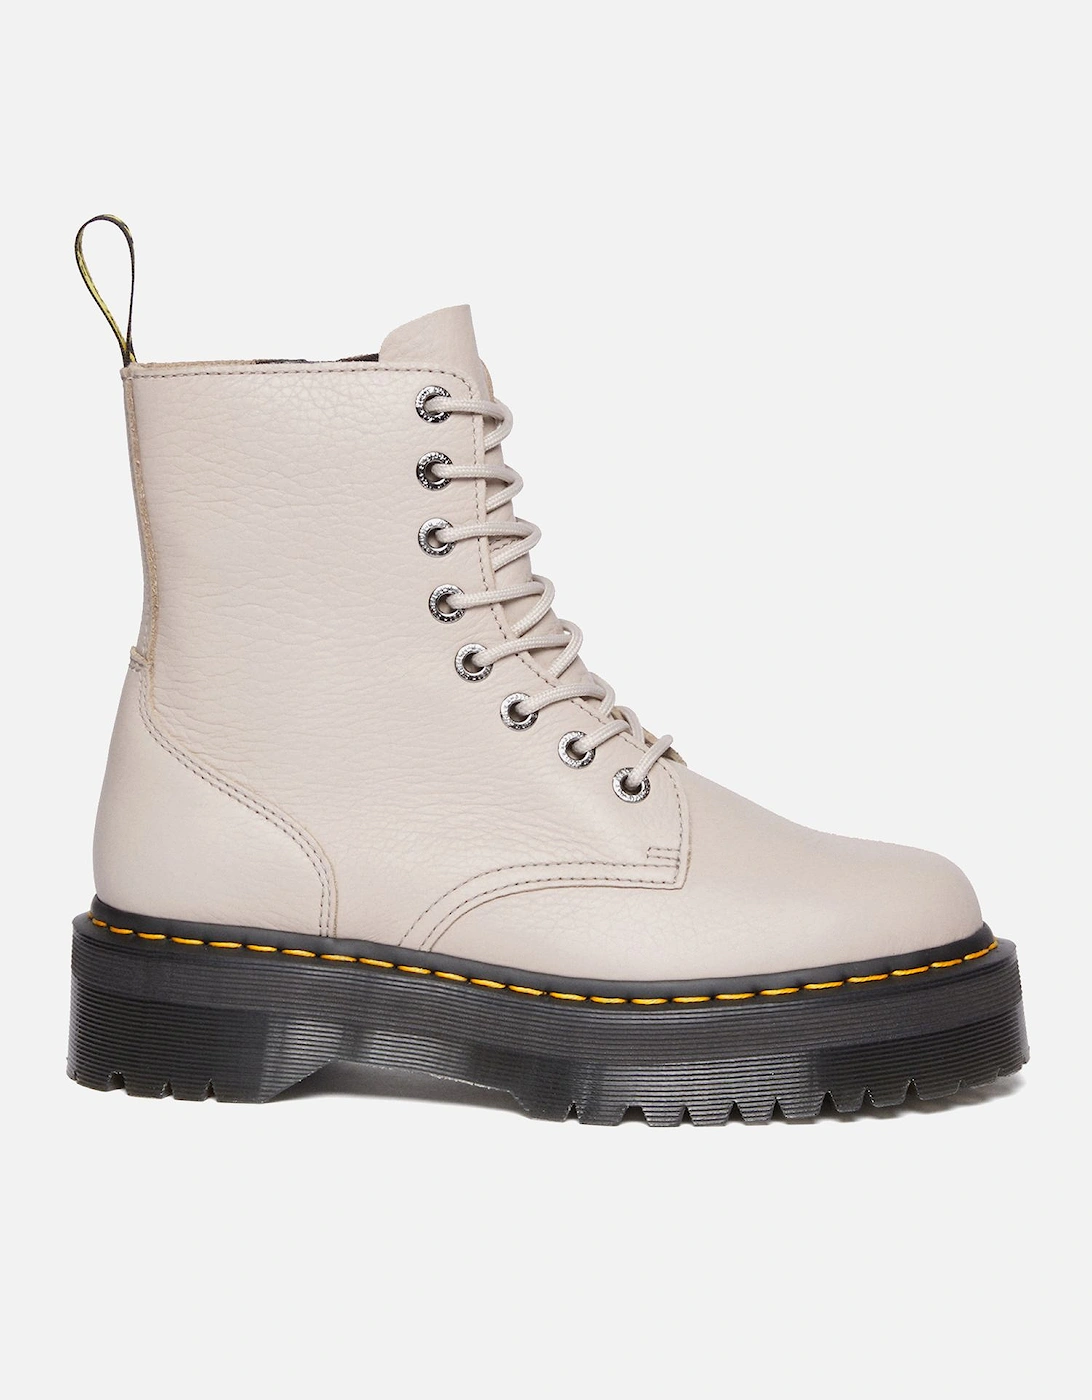 Dr. Martens Women's Jadon Leather 8-Eye Boots - Dr. Martens - Home - Dr. Martens Women's Jadon Leather 8-Eye Boots, 3 of 2